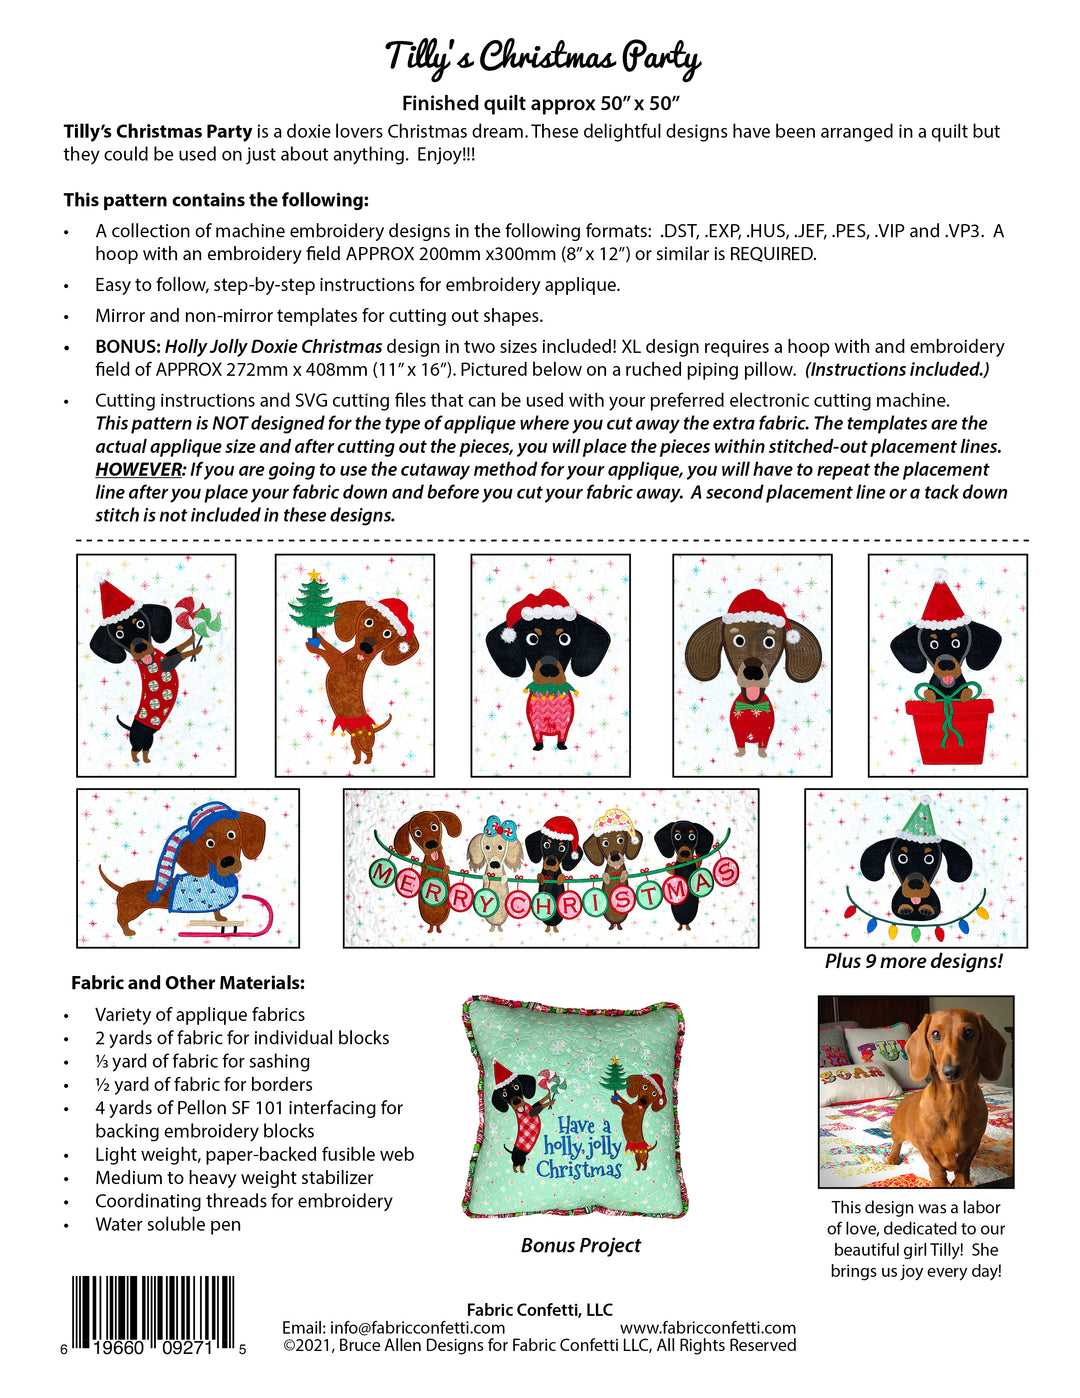 Tilly's Christmas Party for Machine Embroidery